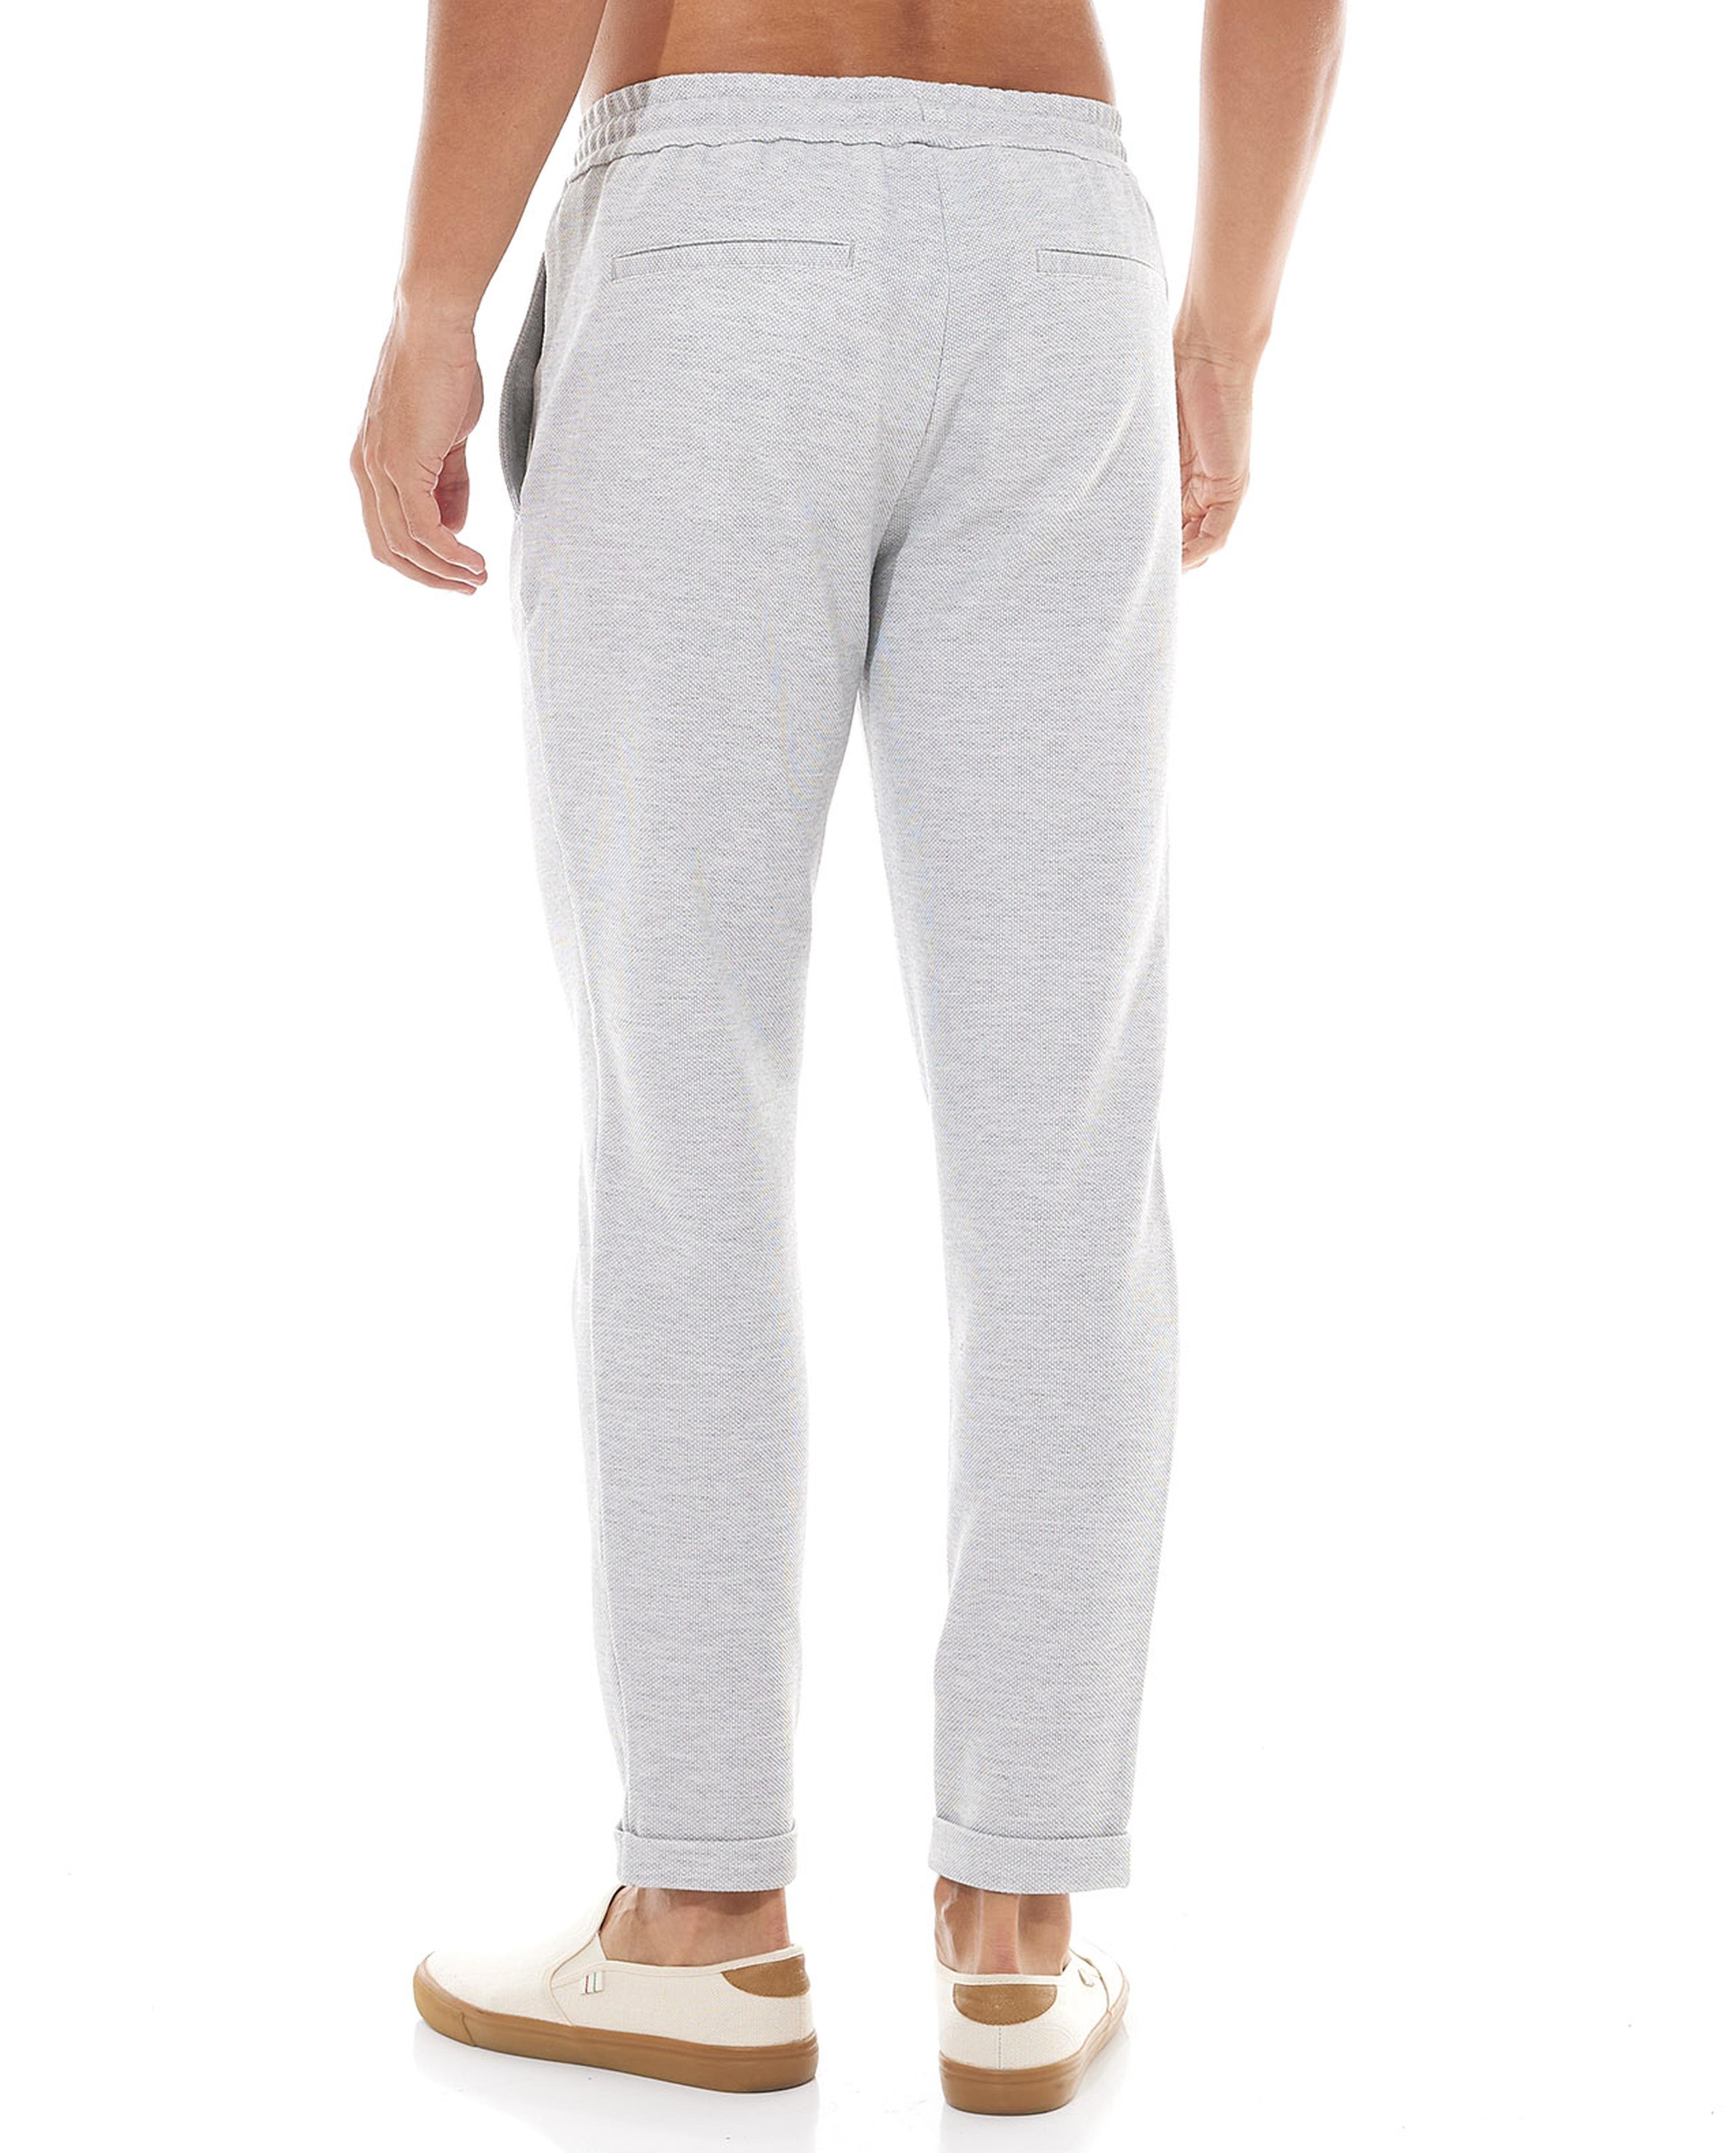 Solid Knit Sweatpants with Drawstring Waist